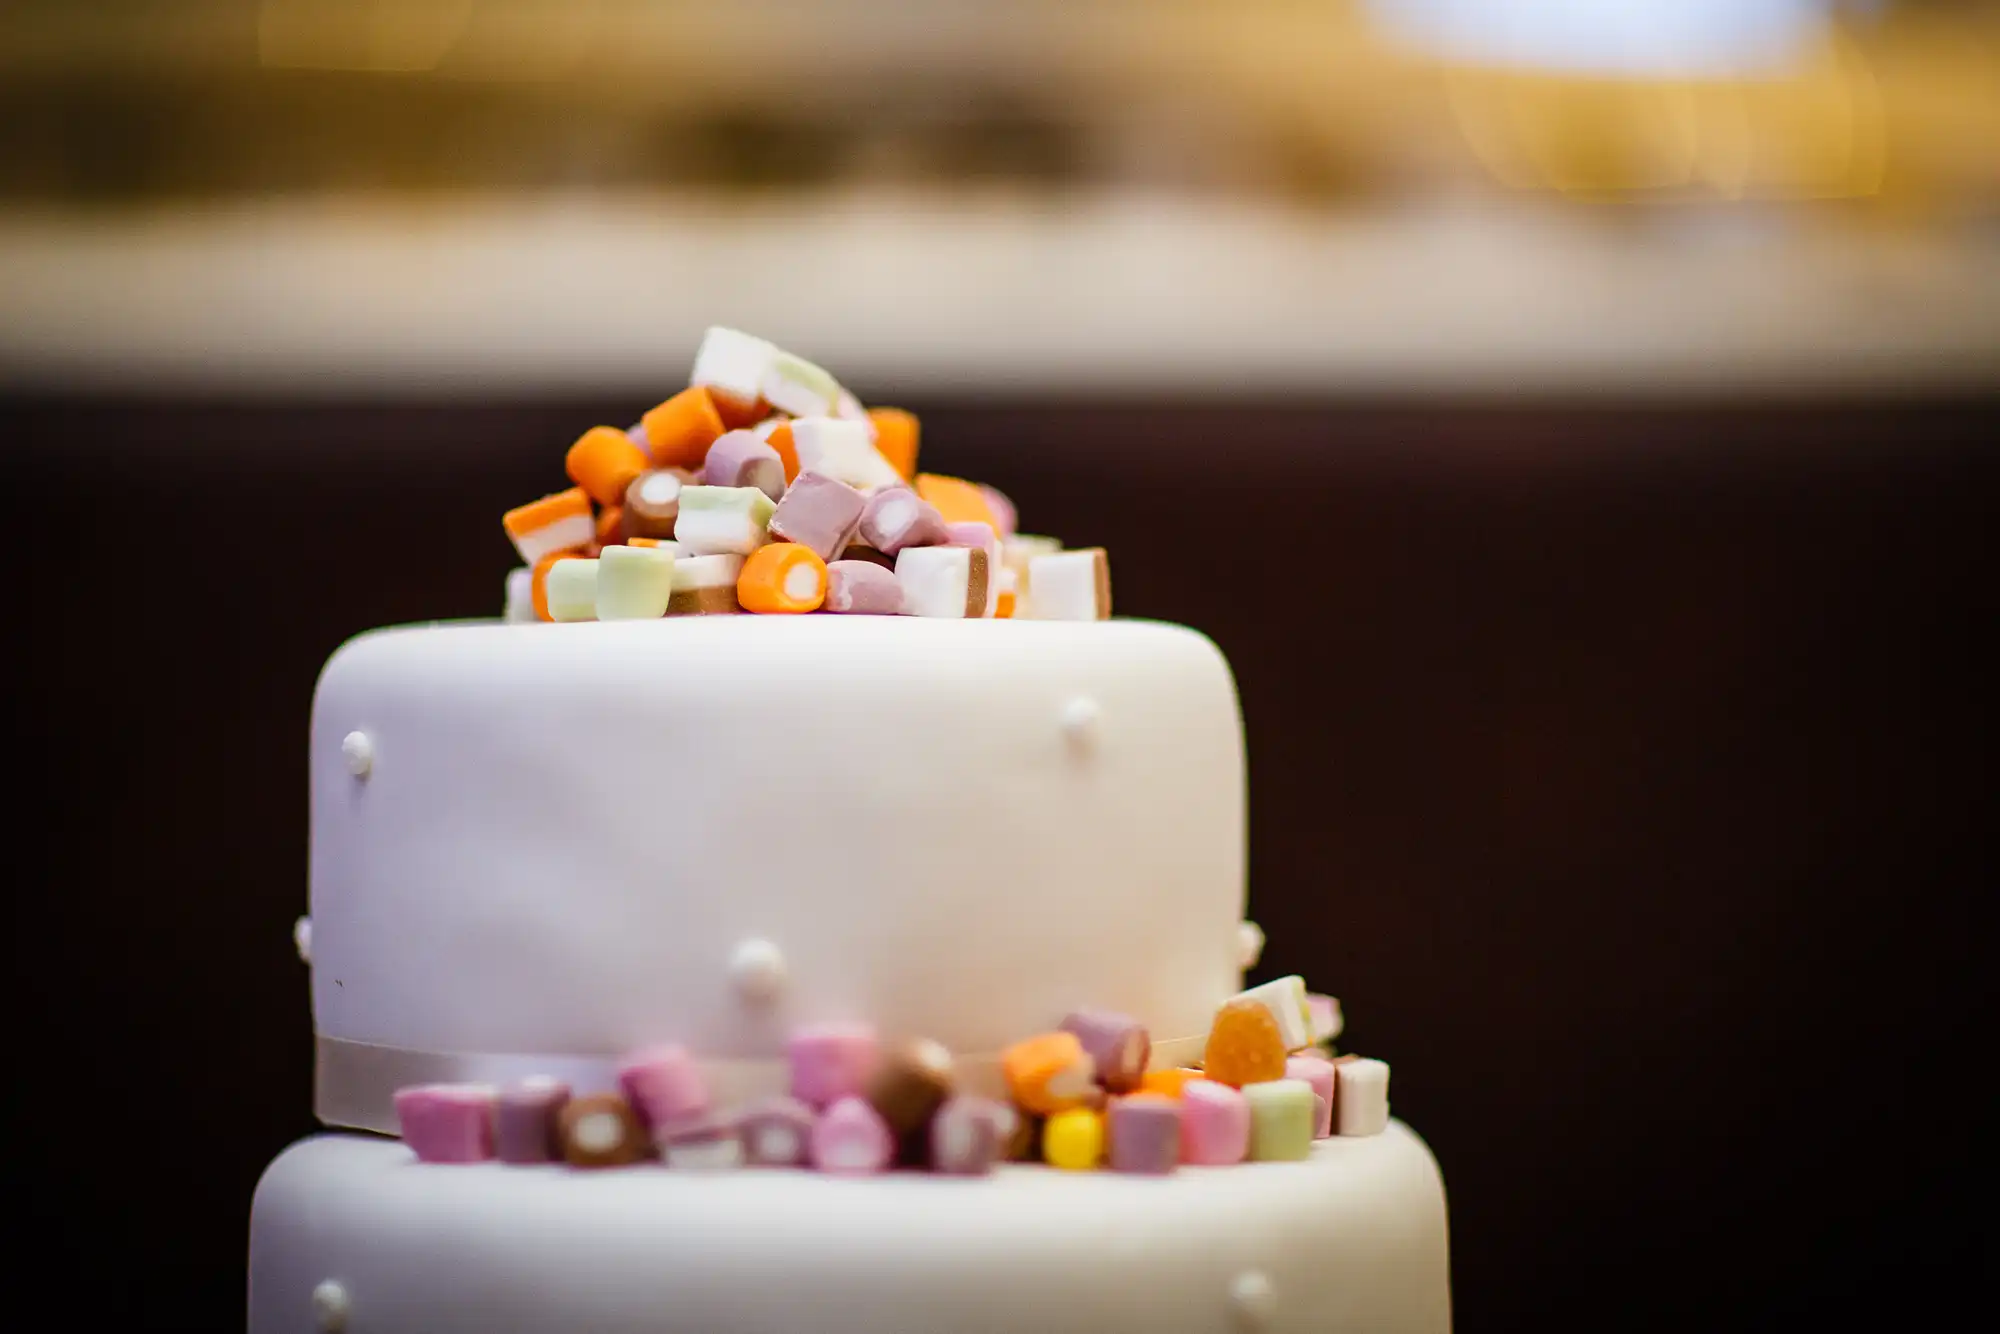 White two-tiered cake decorated with assorted colorful candies on top, set against a softly blurred background.